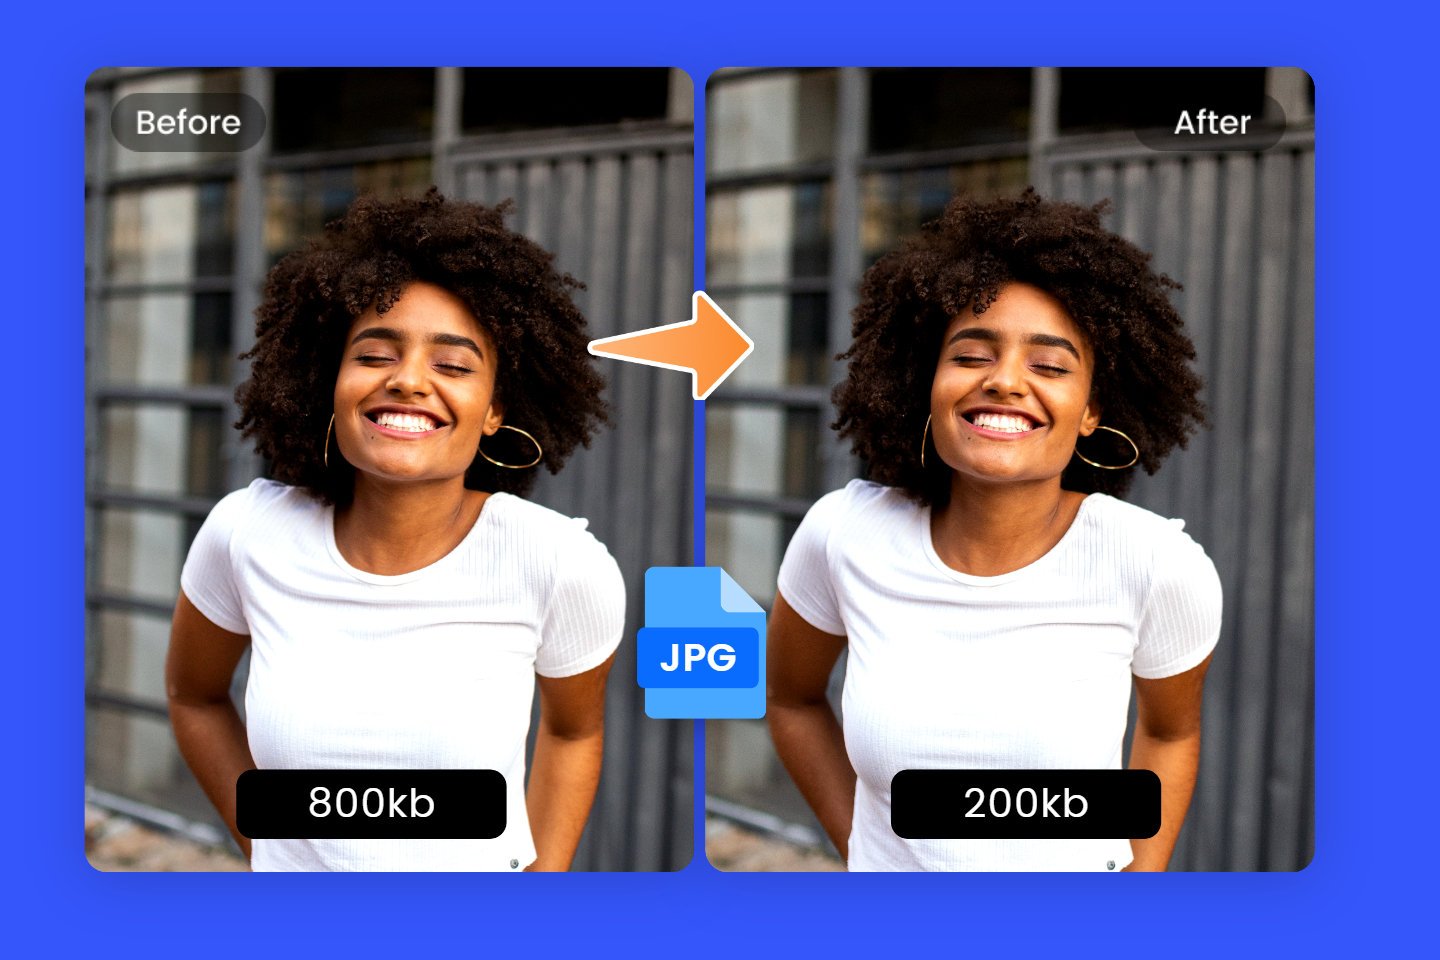 Compress a female selfie jpg picture from 800kb to 200kb in fotor online